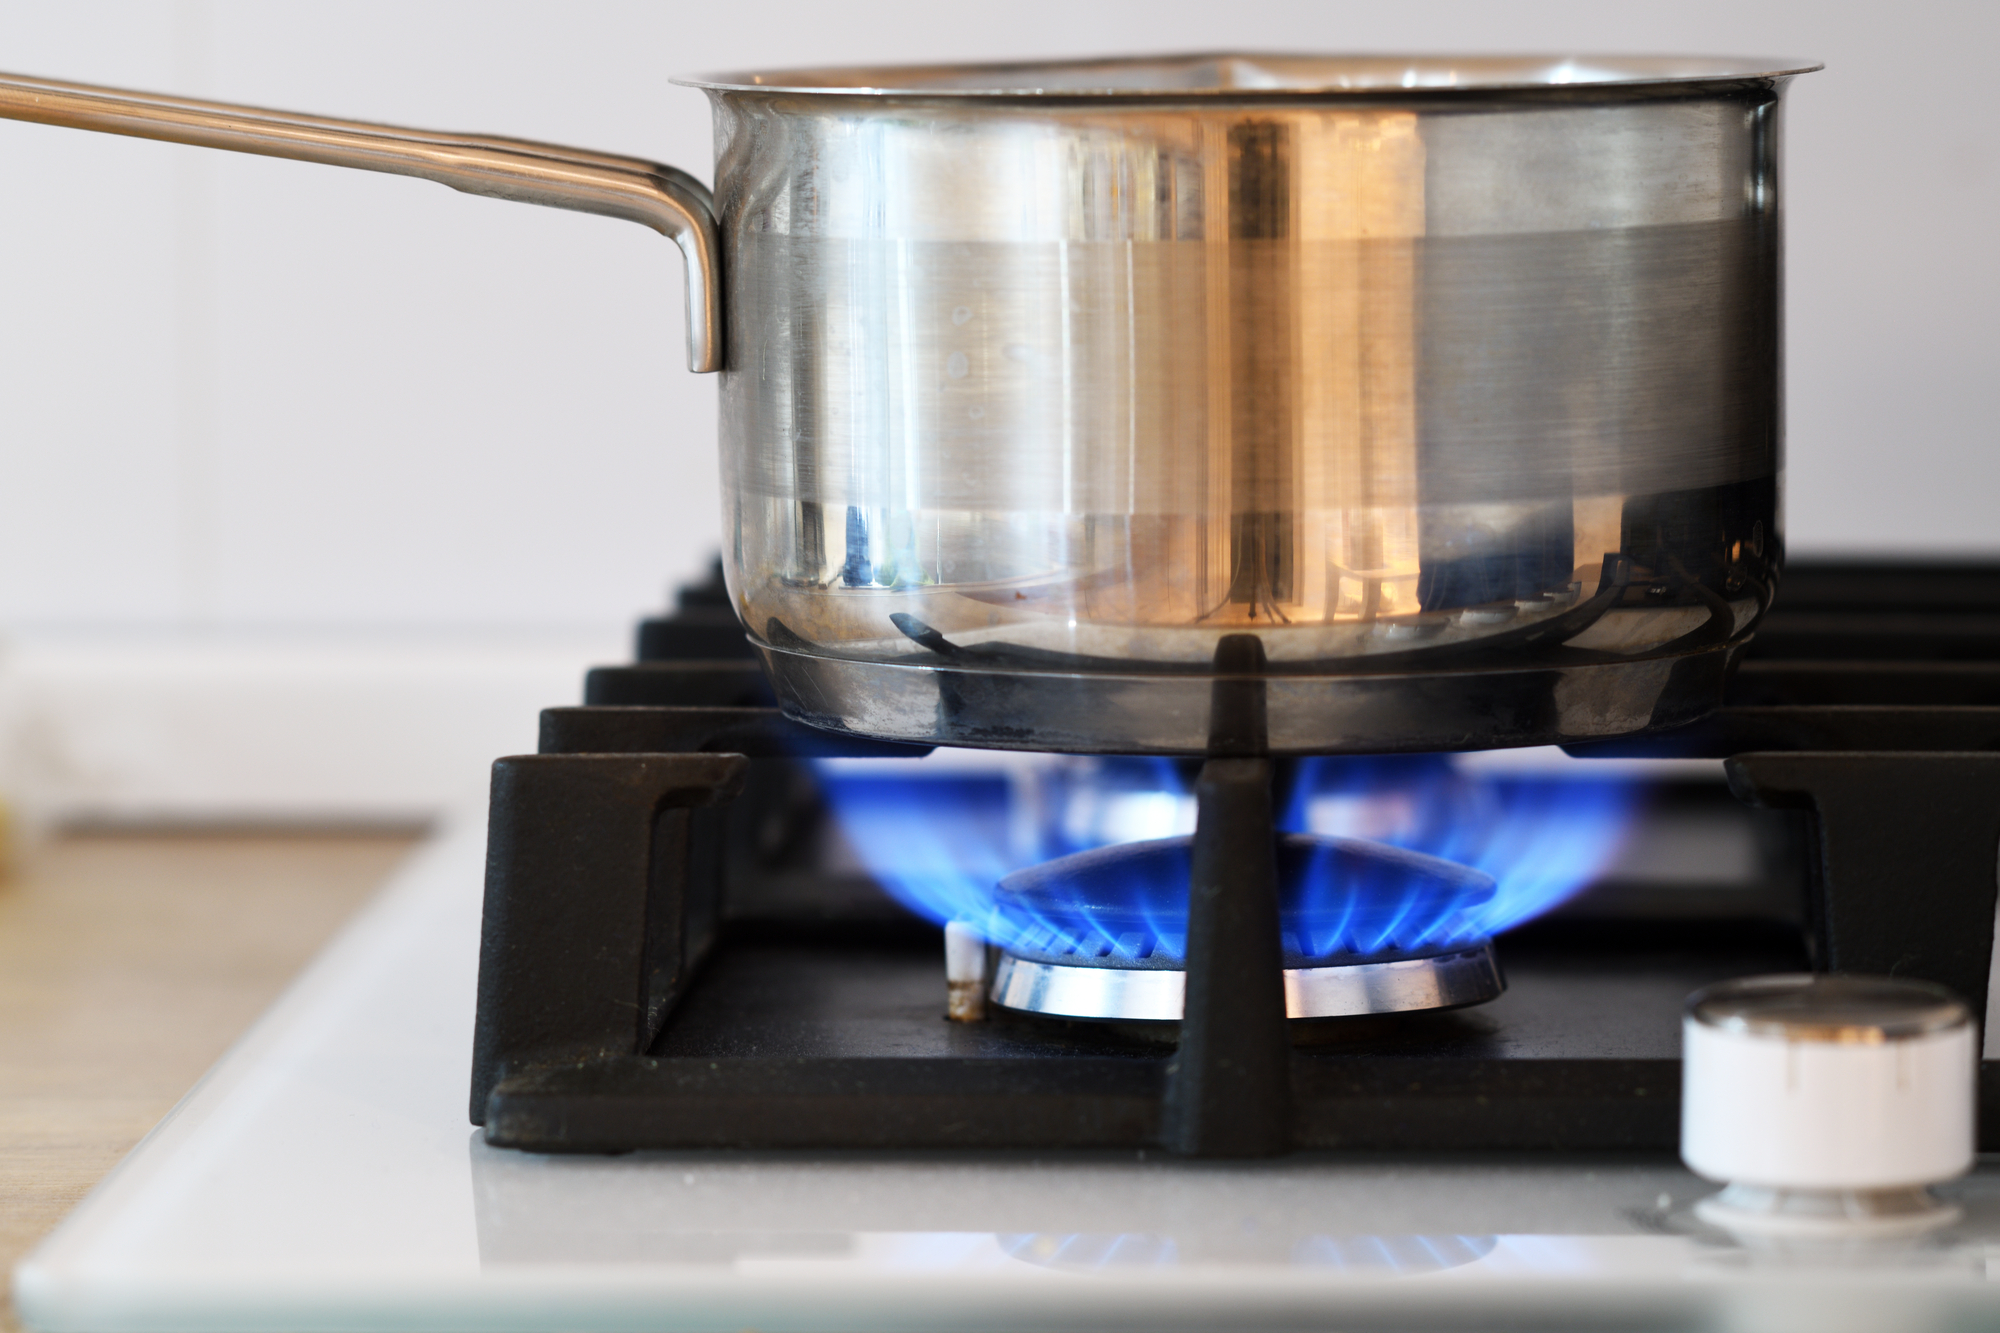 Gas stove can lead to poor IAQ